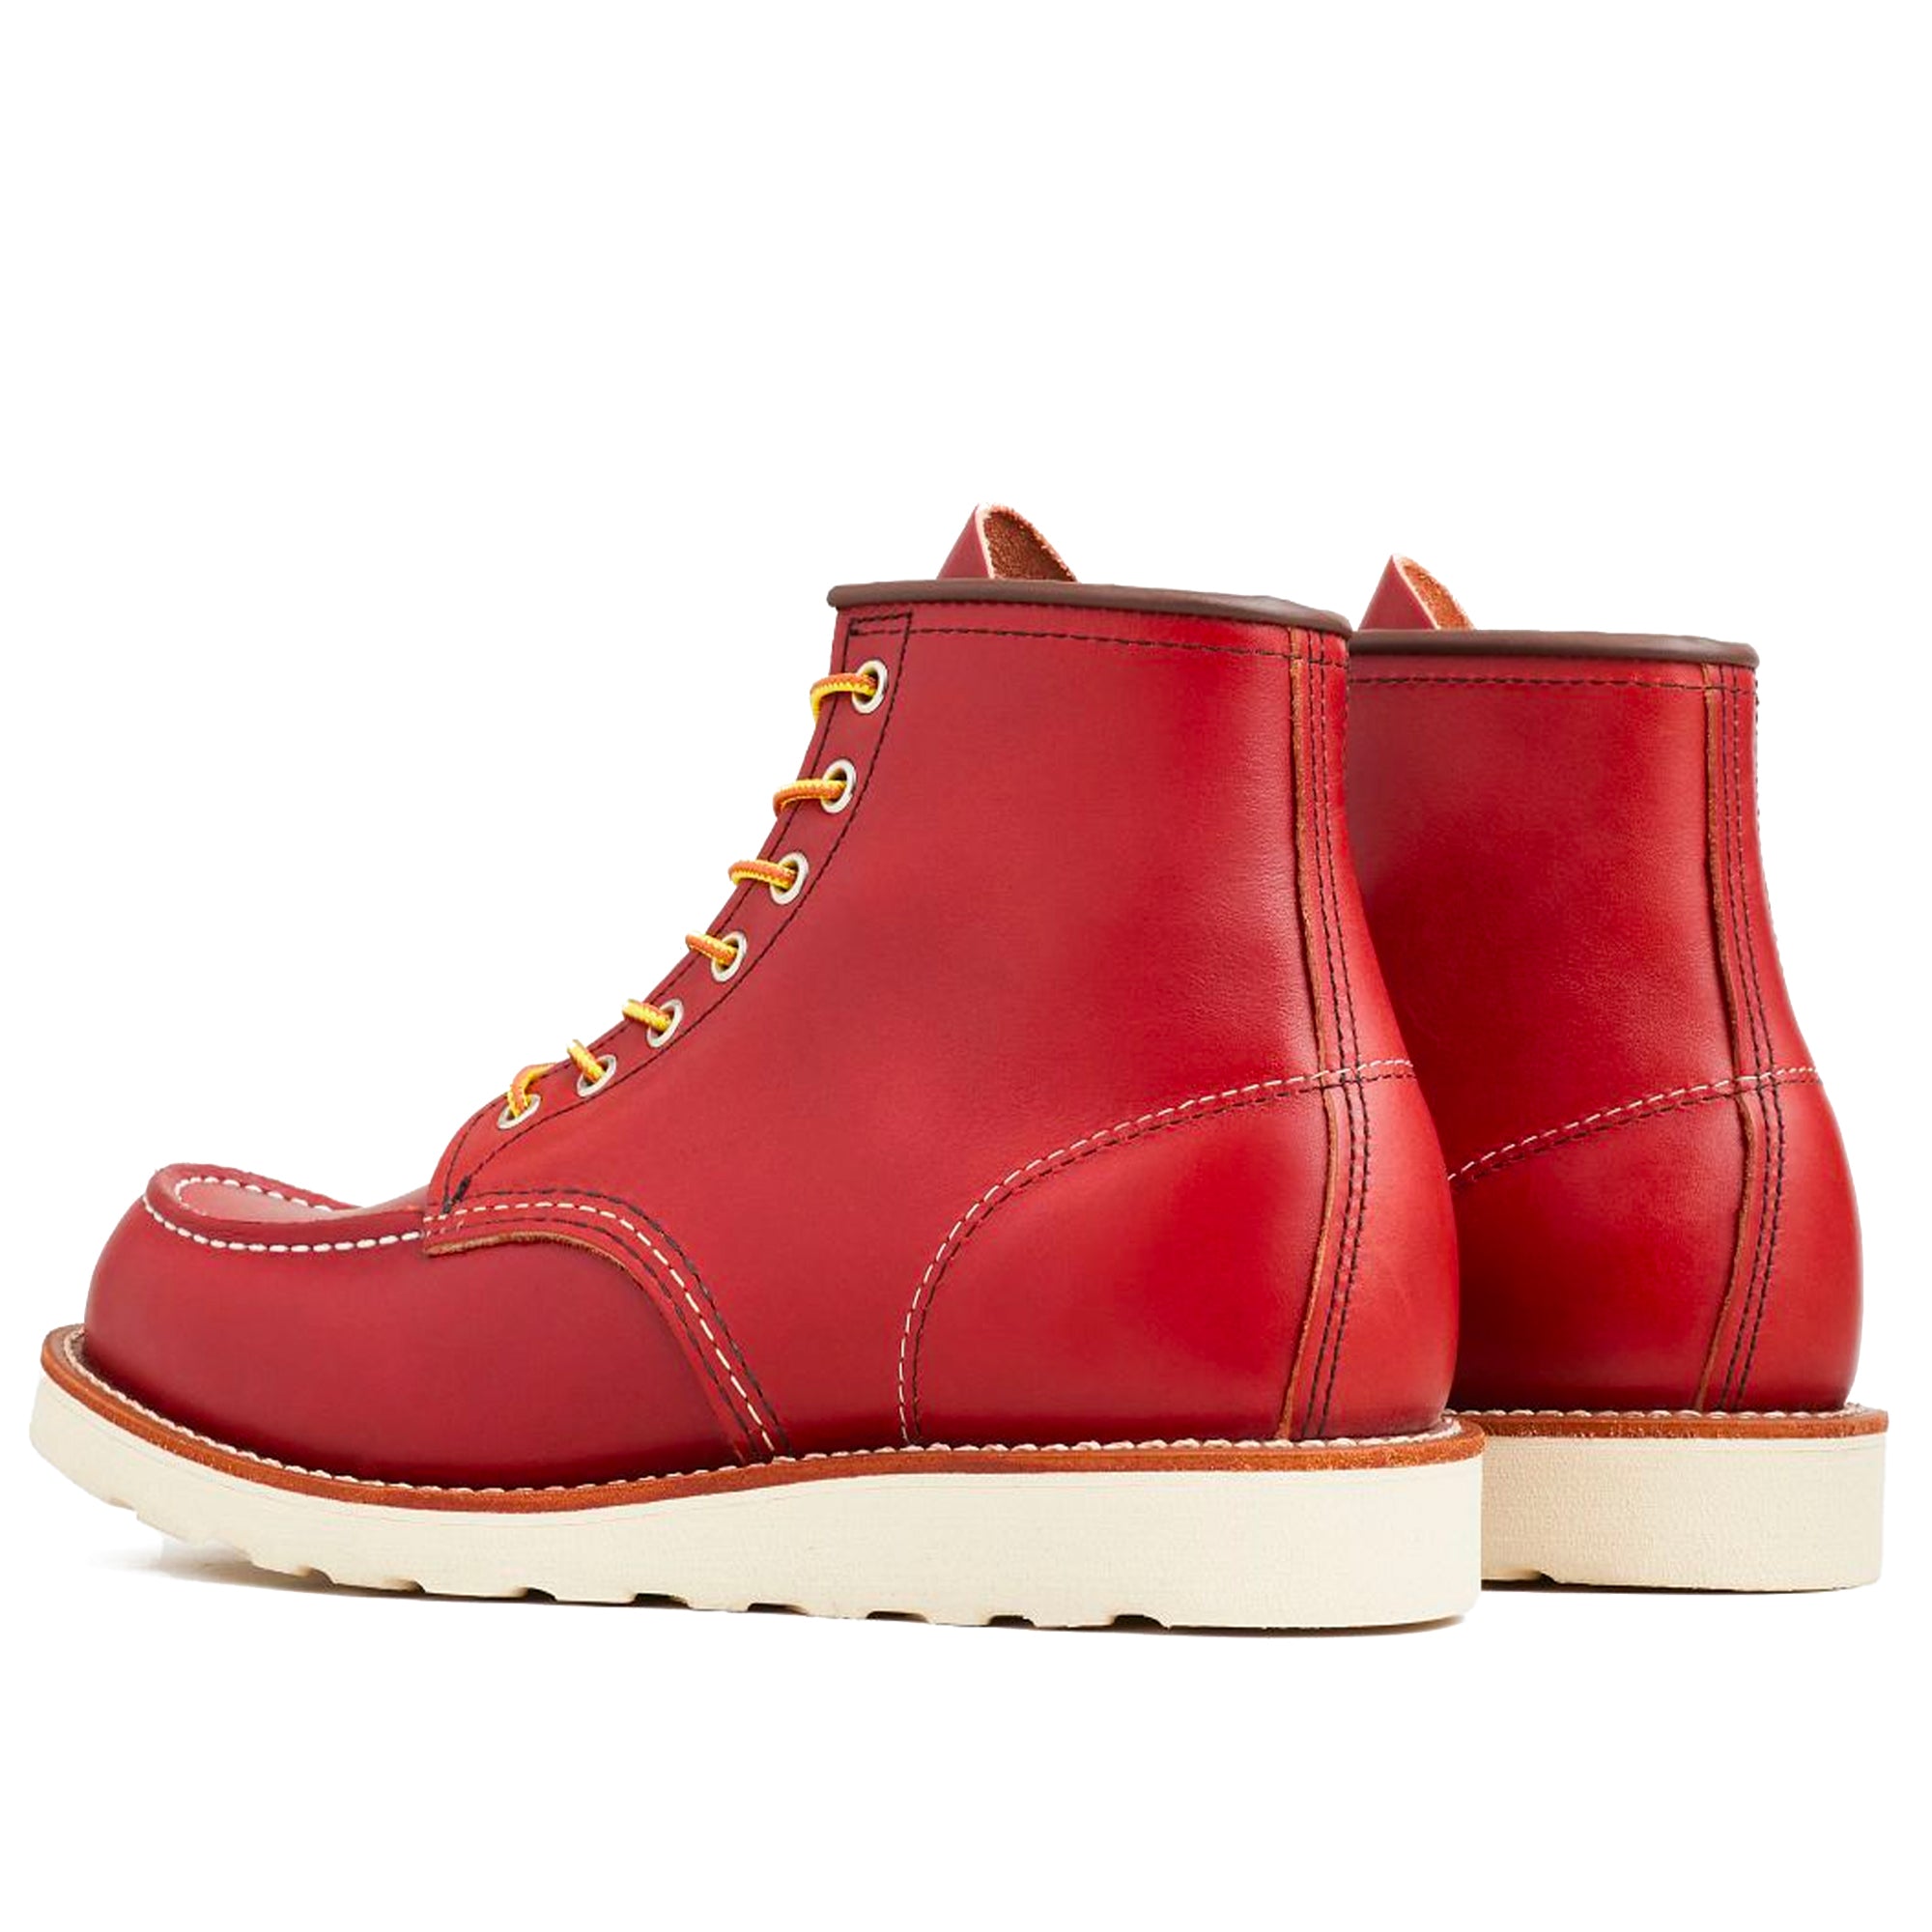 Red Wing 8875  6" Moc Toe Leather Boot - Oro Russet Portage